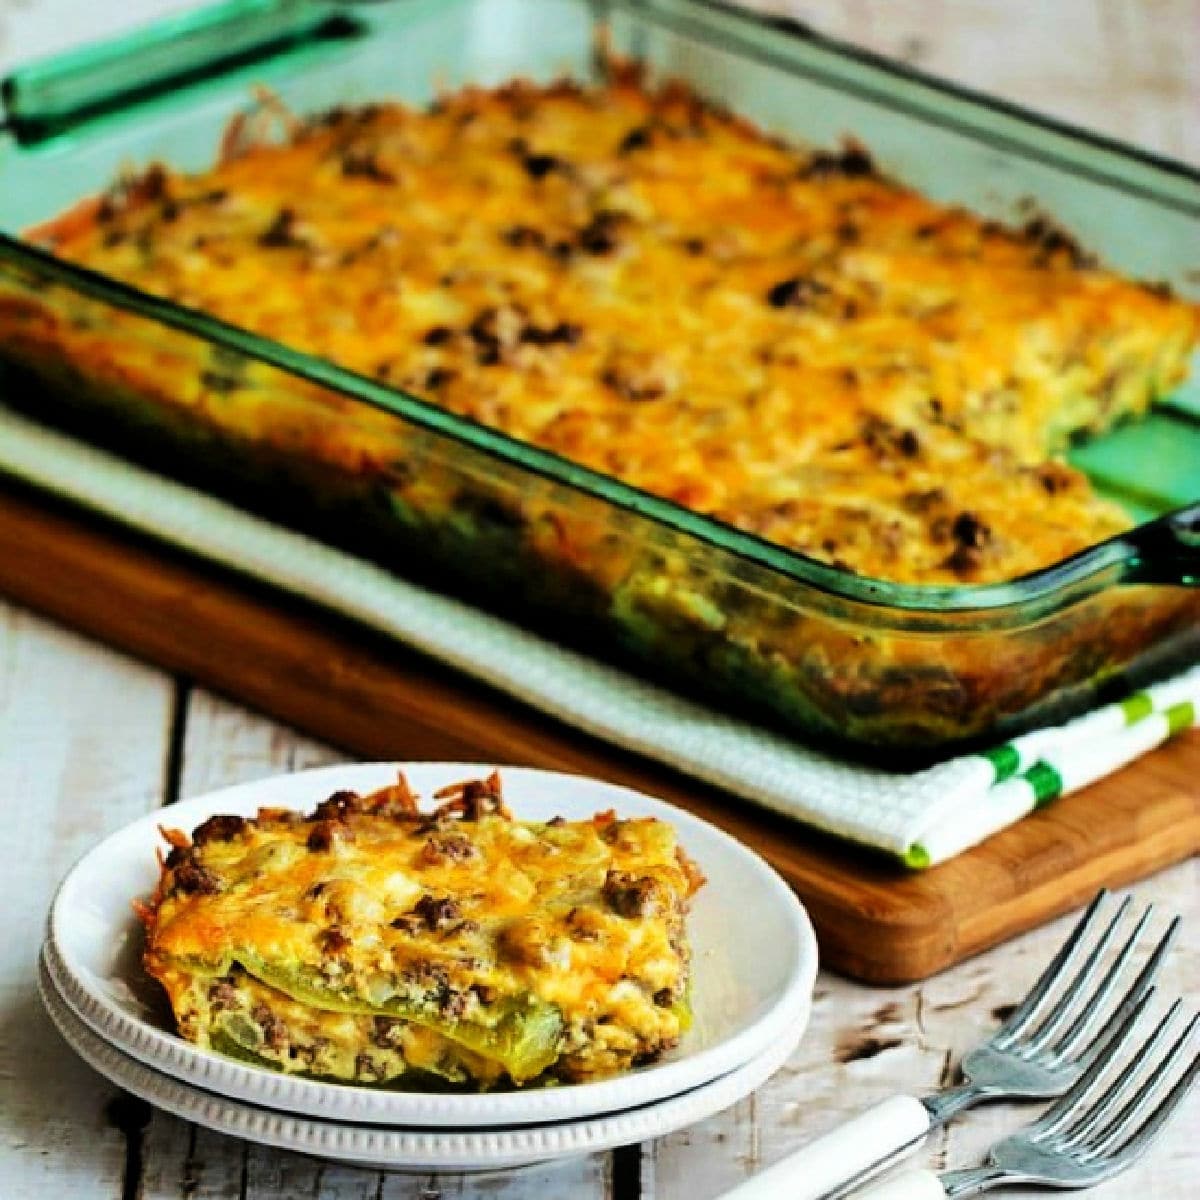 Beefy Cheesy Green Chile Bake shown in casserole dish with one piece on plate in front.